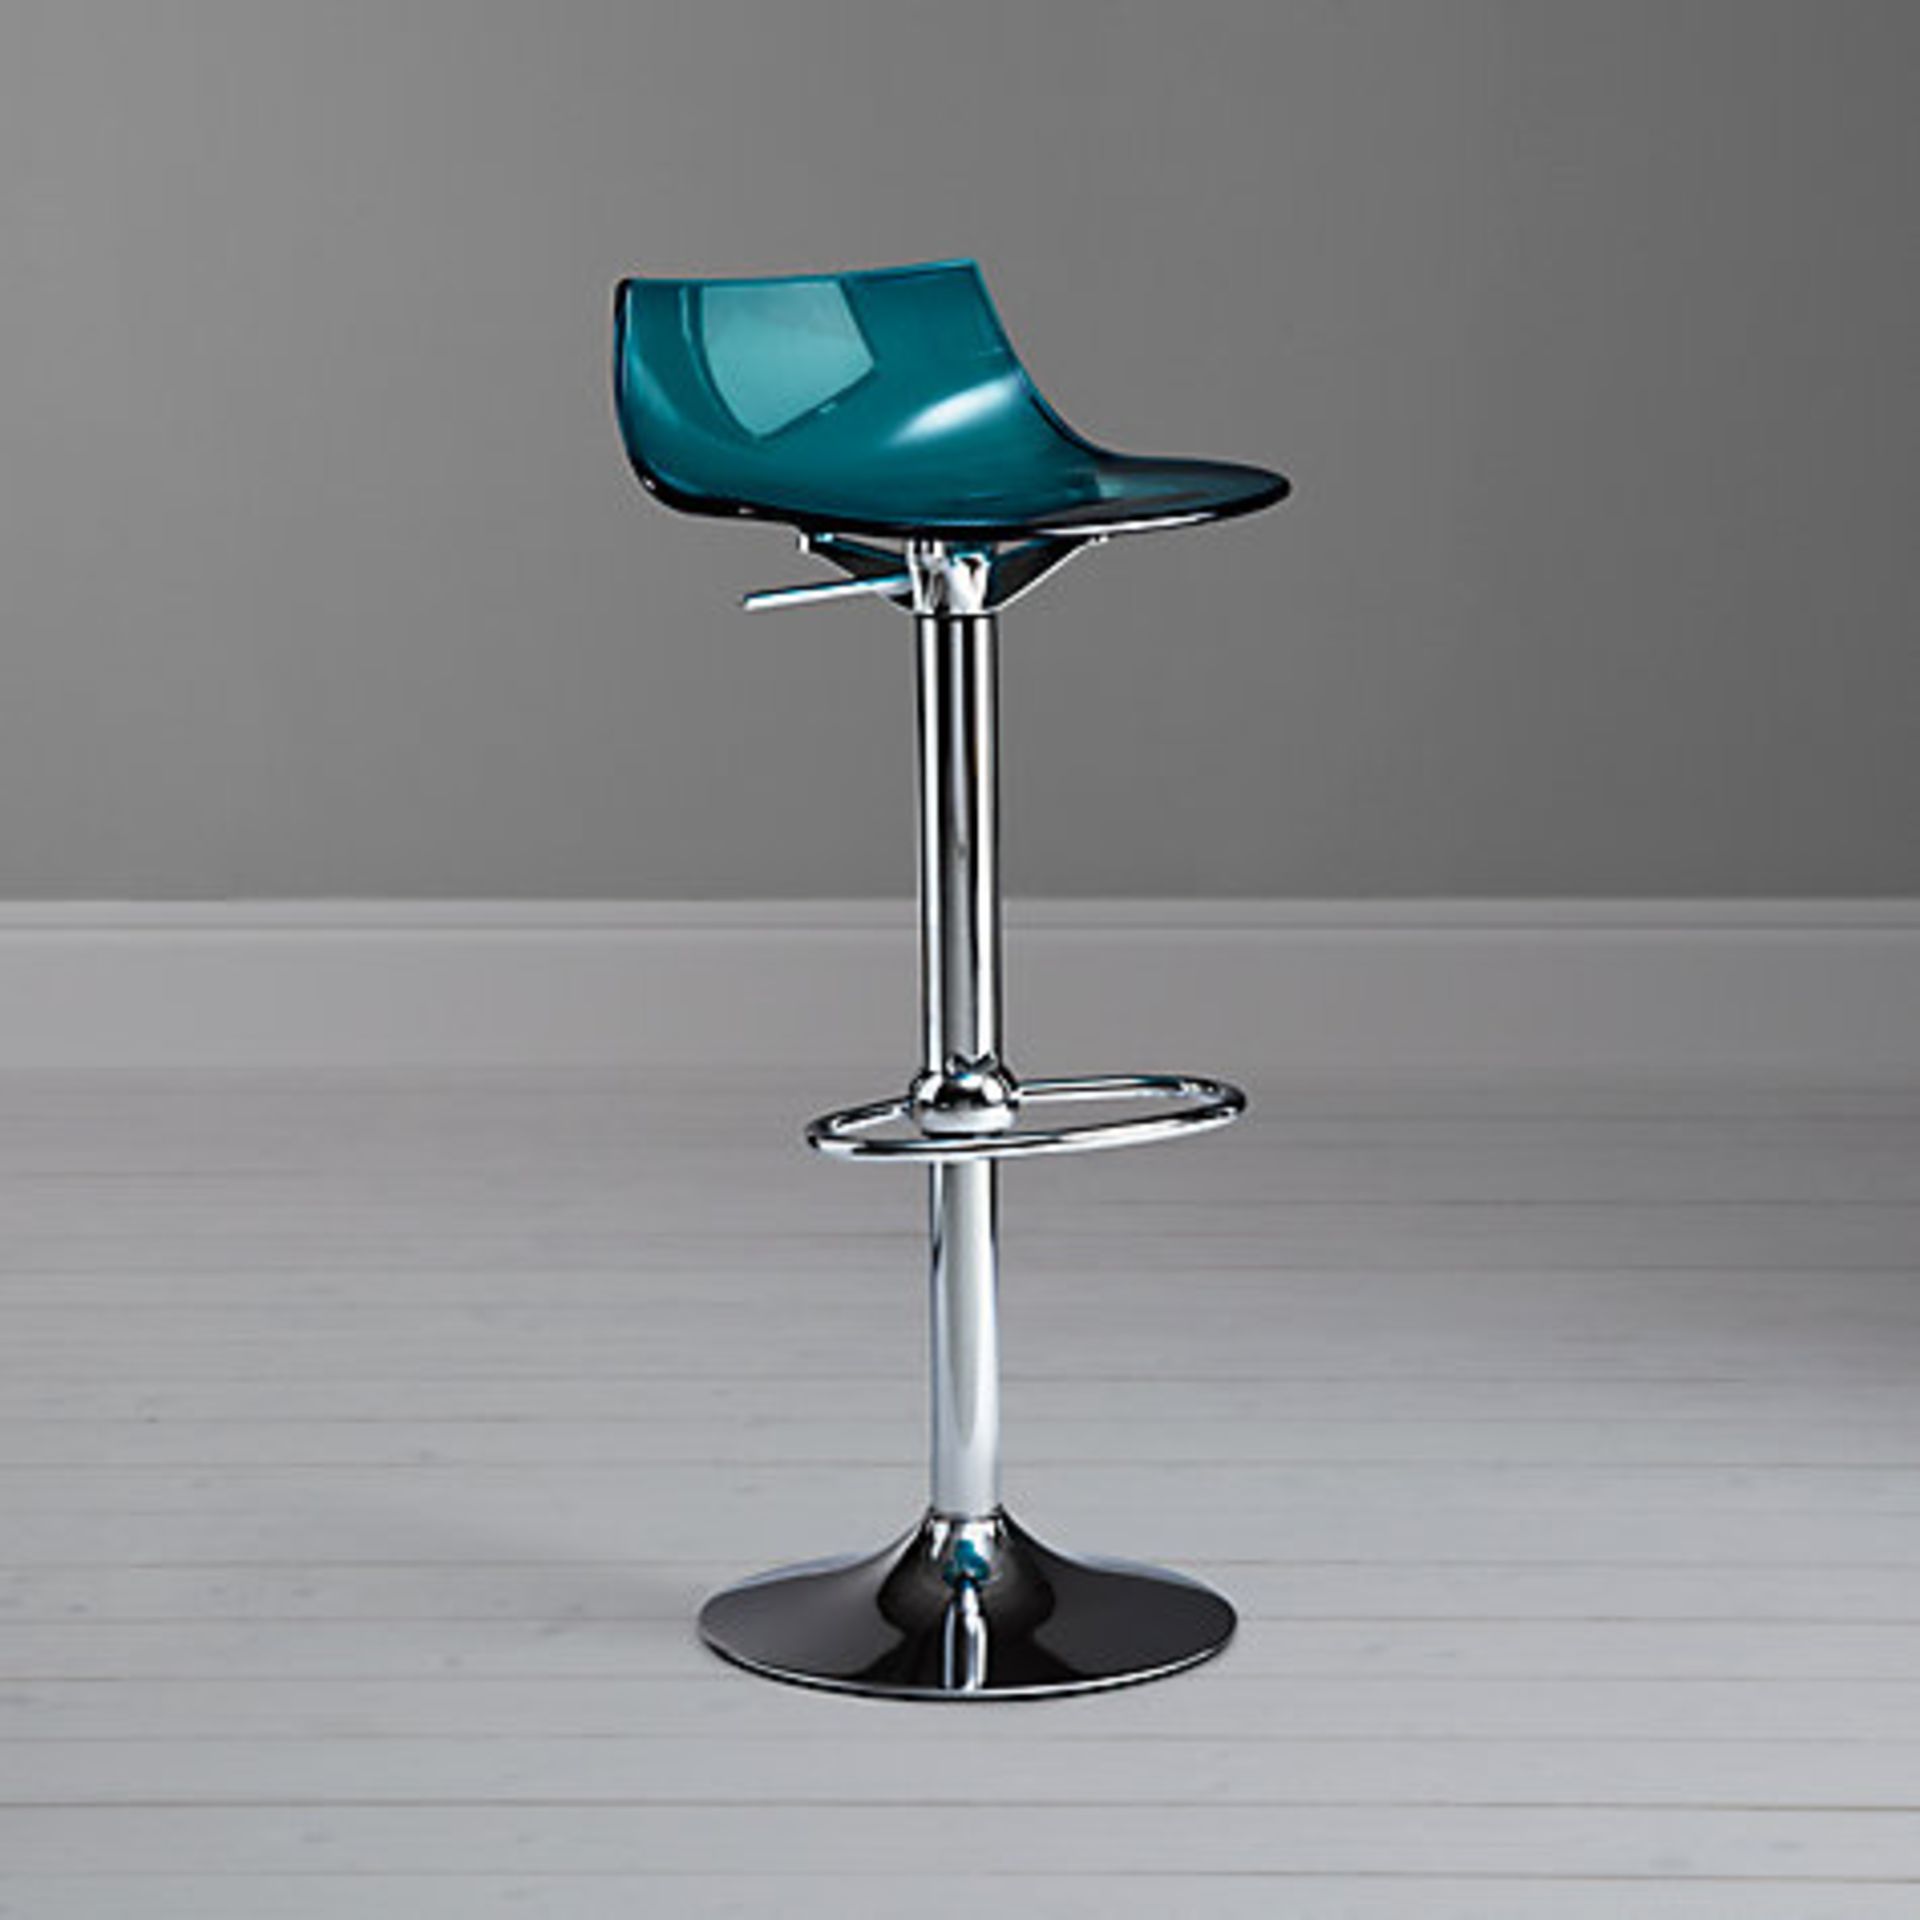 1 x BOXED LED SMOKED CHROME BAR STOOL RRP £165 (12.6.17)(2484859) *PLEASE NOTE THAT THE BID PRICE IS